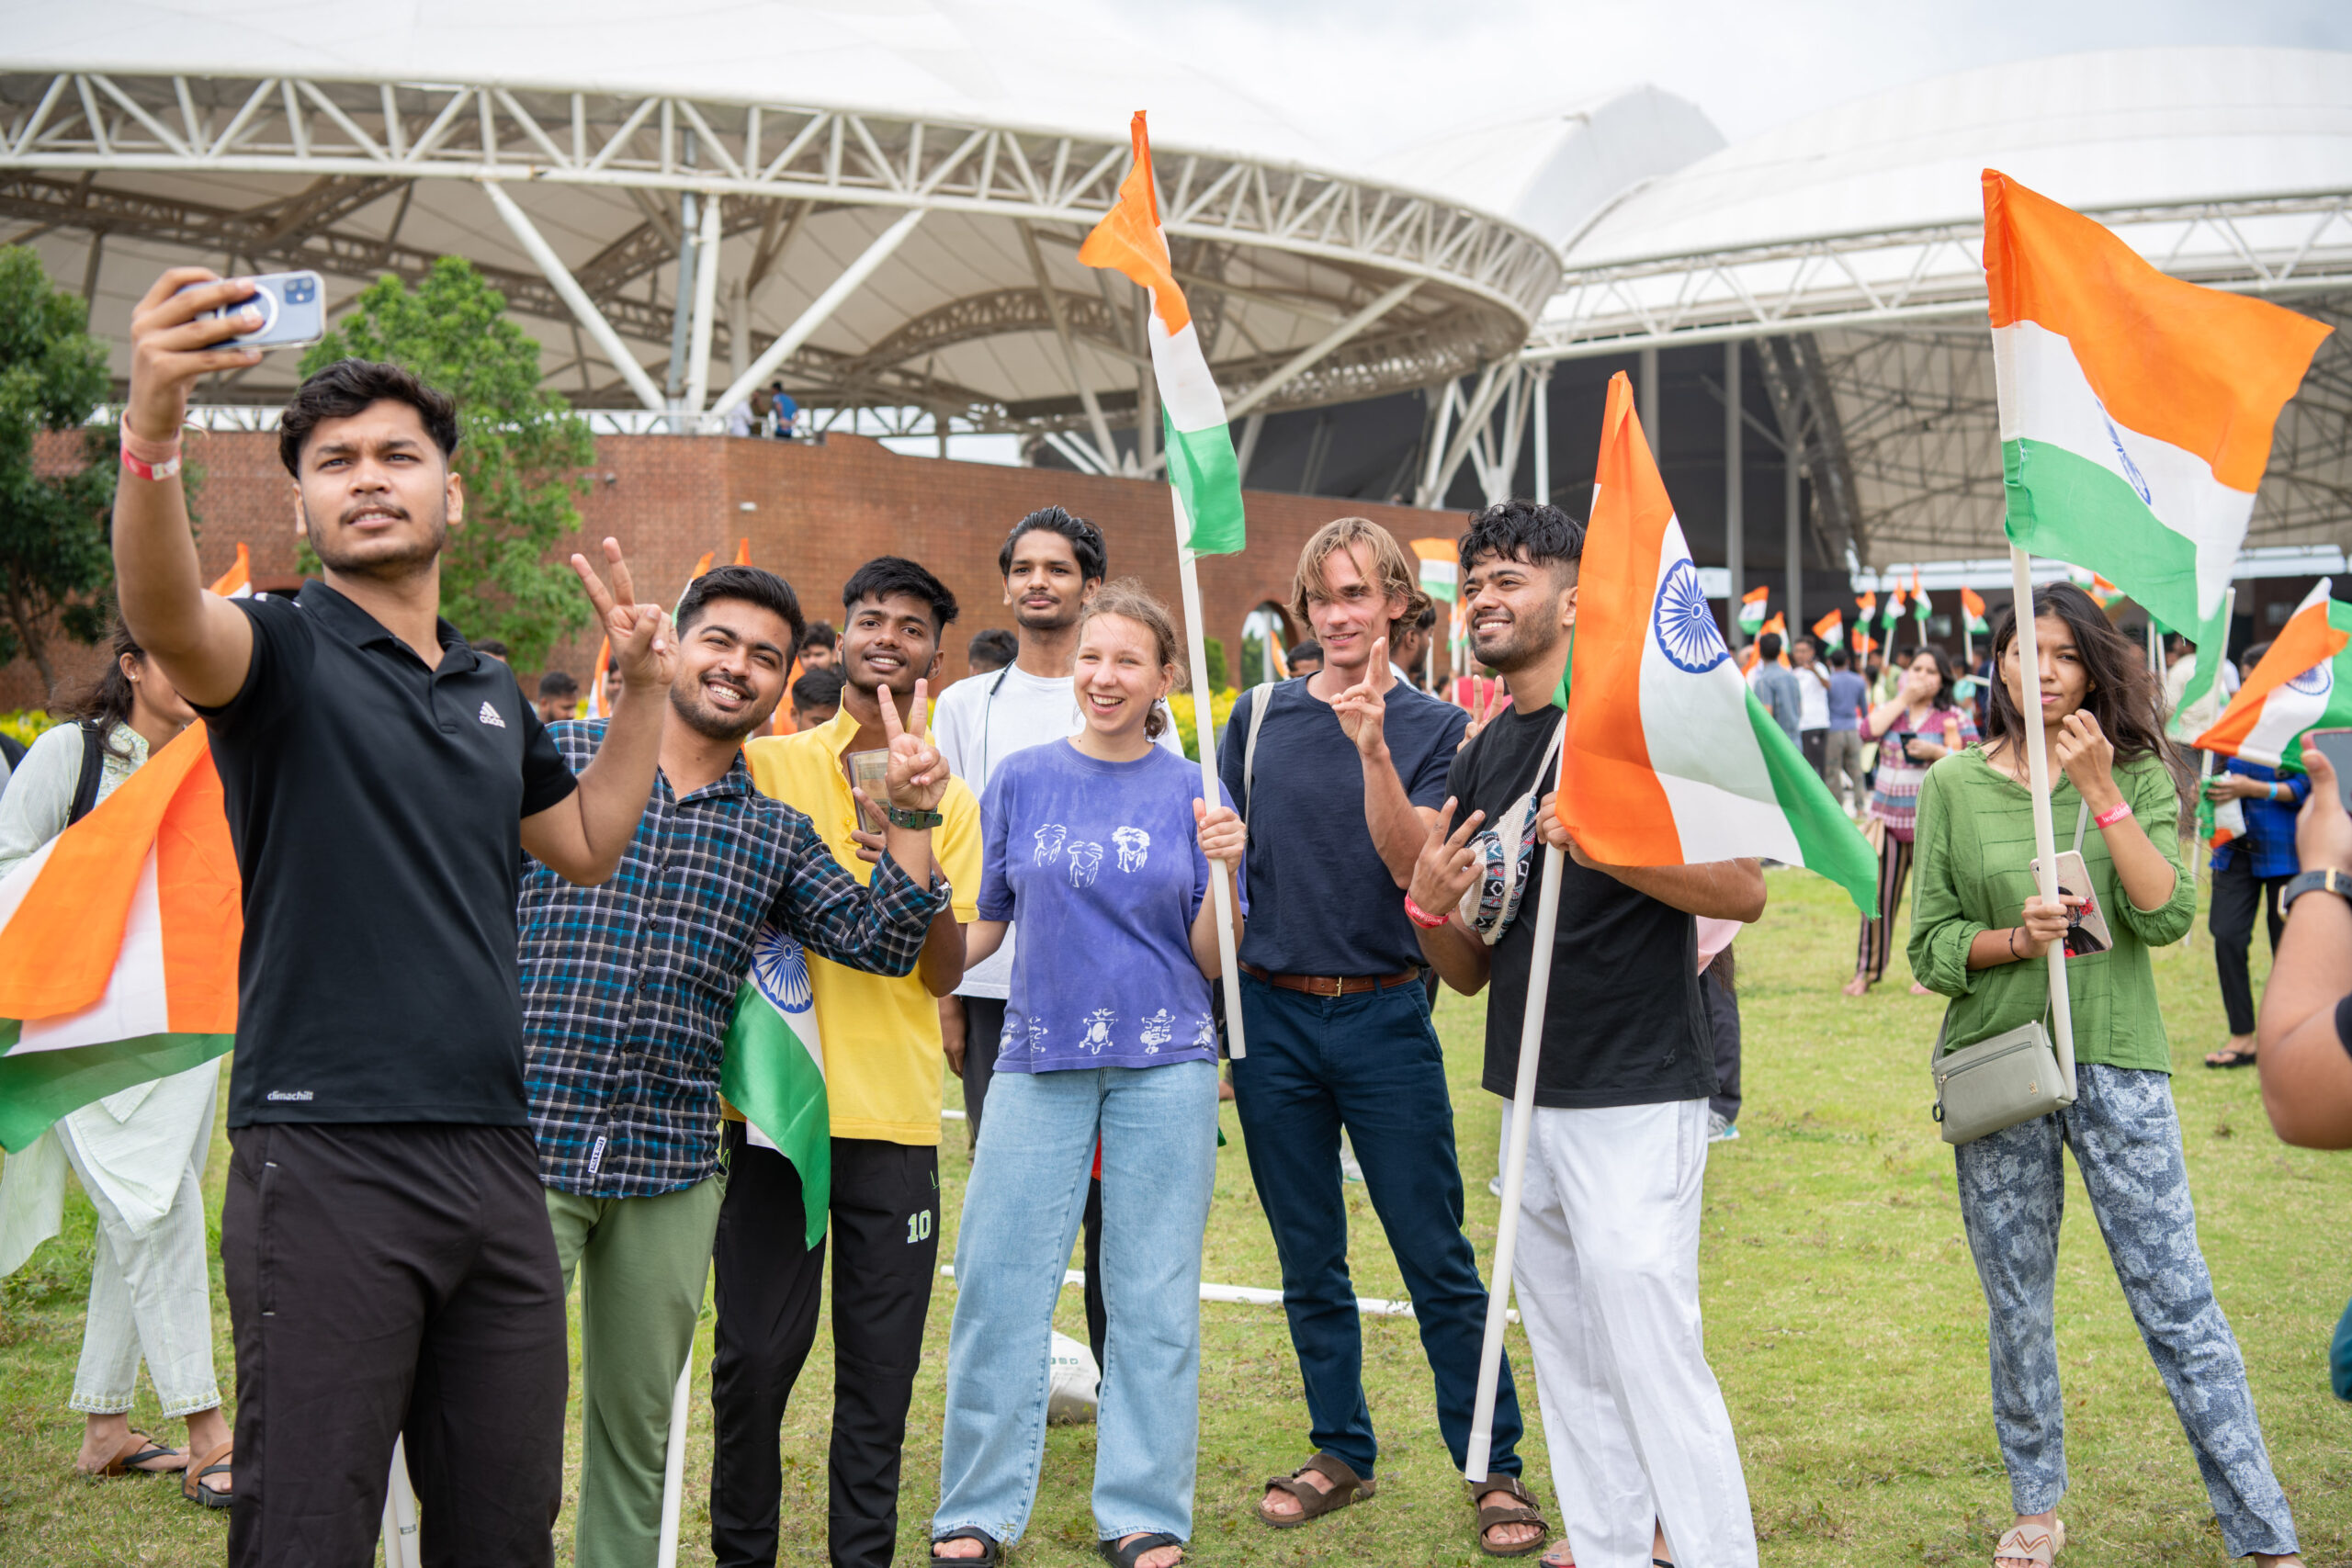 Hyderabad: Youth from across the world wave the Indian National Flag at the world’s largest meditation center